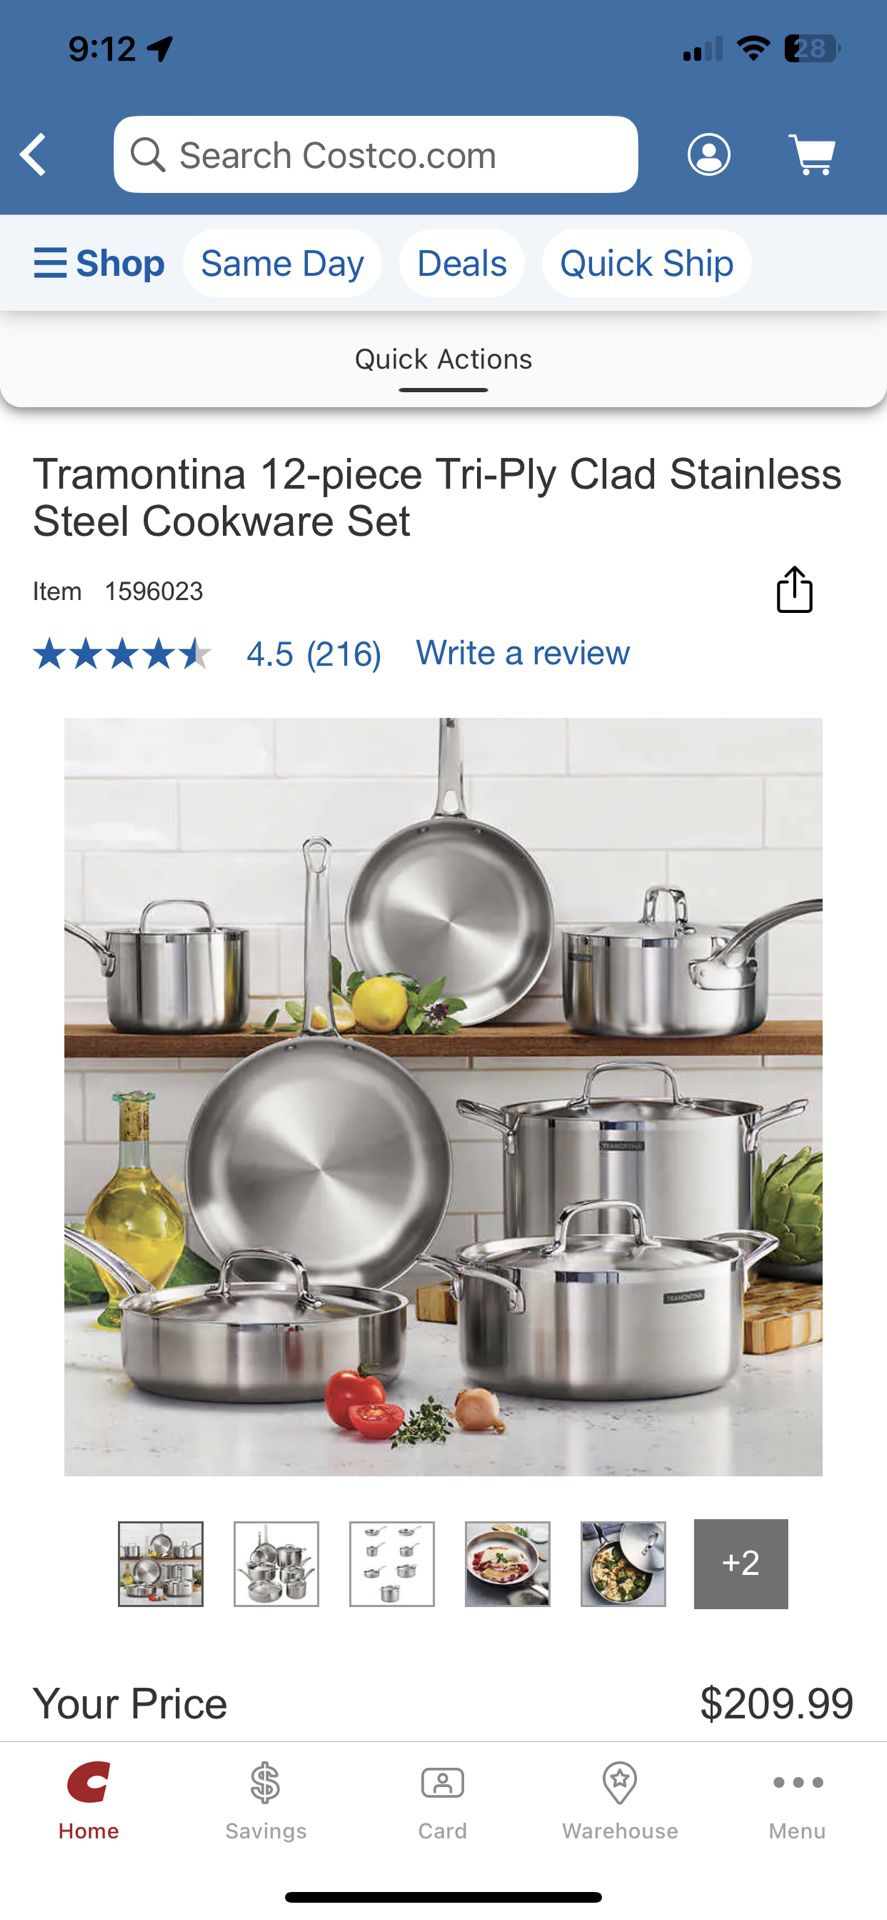 Tramontina 12-piece Tri-Ply Clad Stainless Steel Cookware